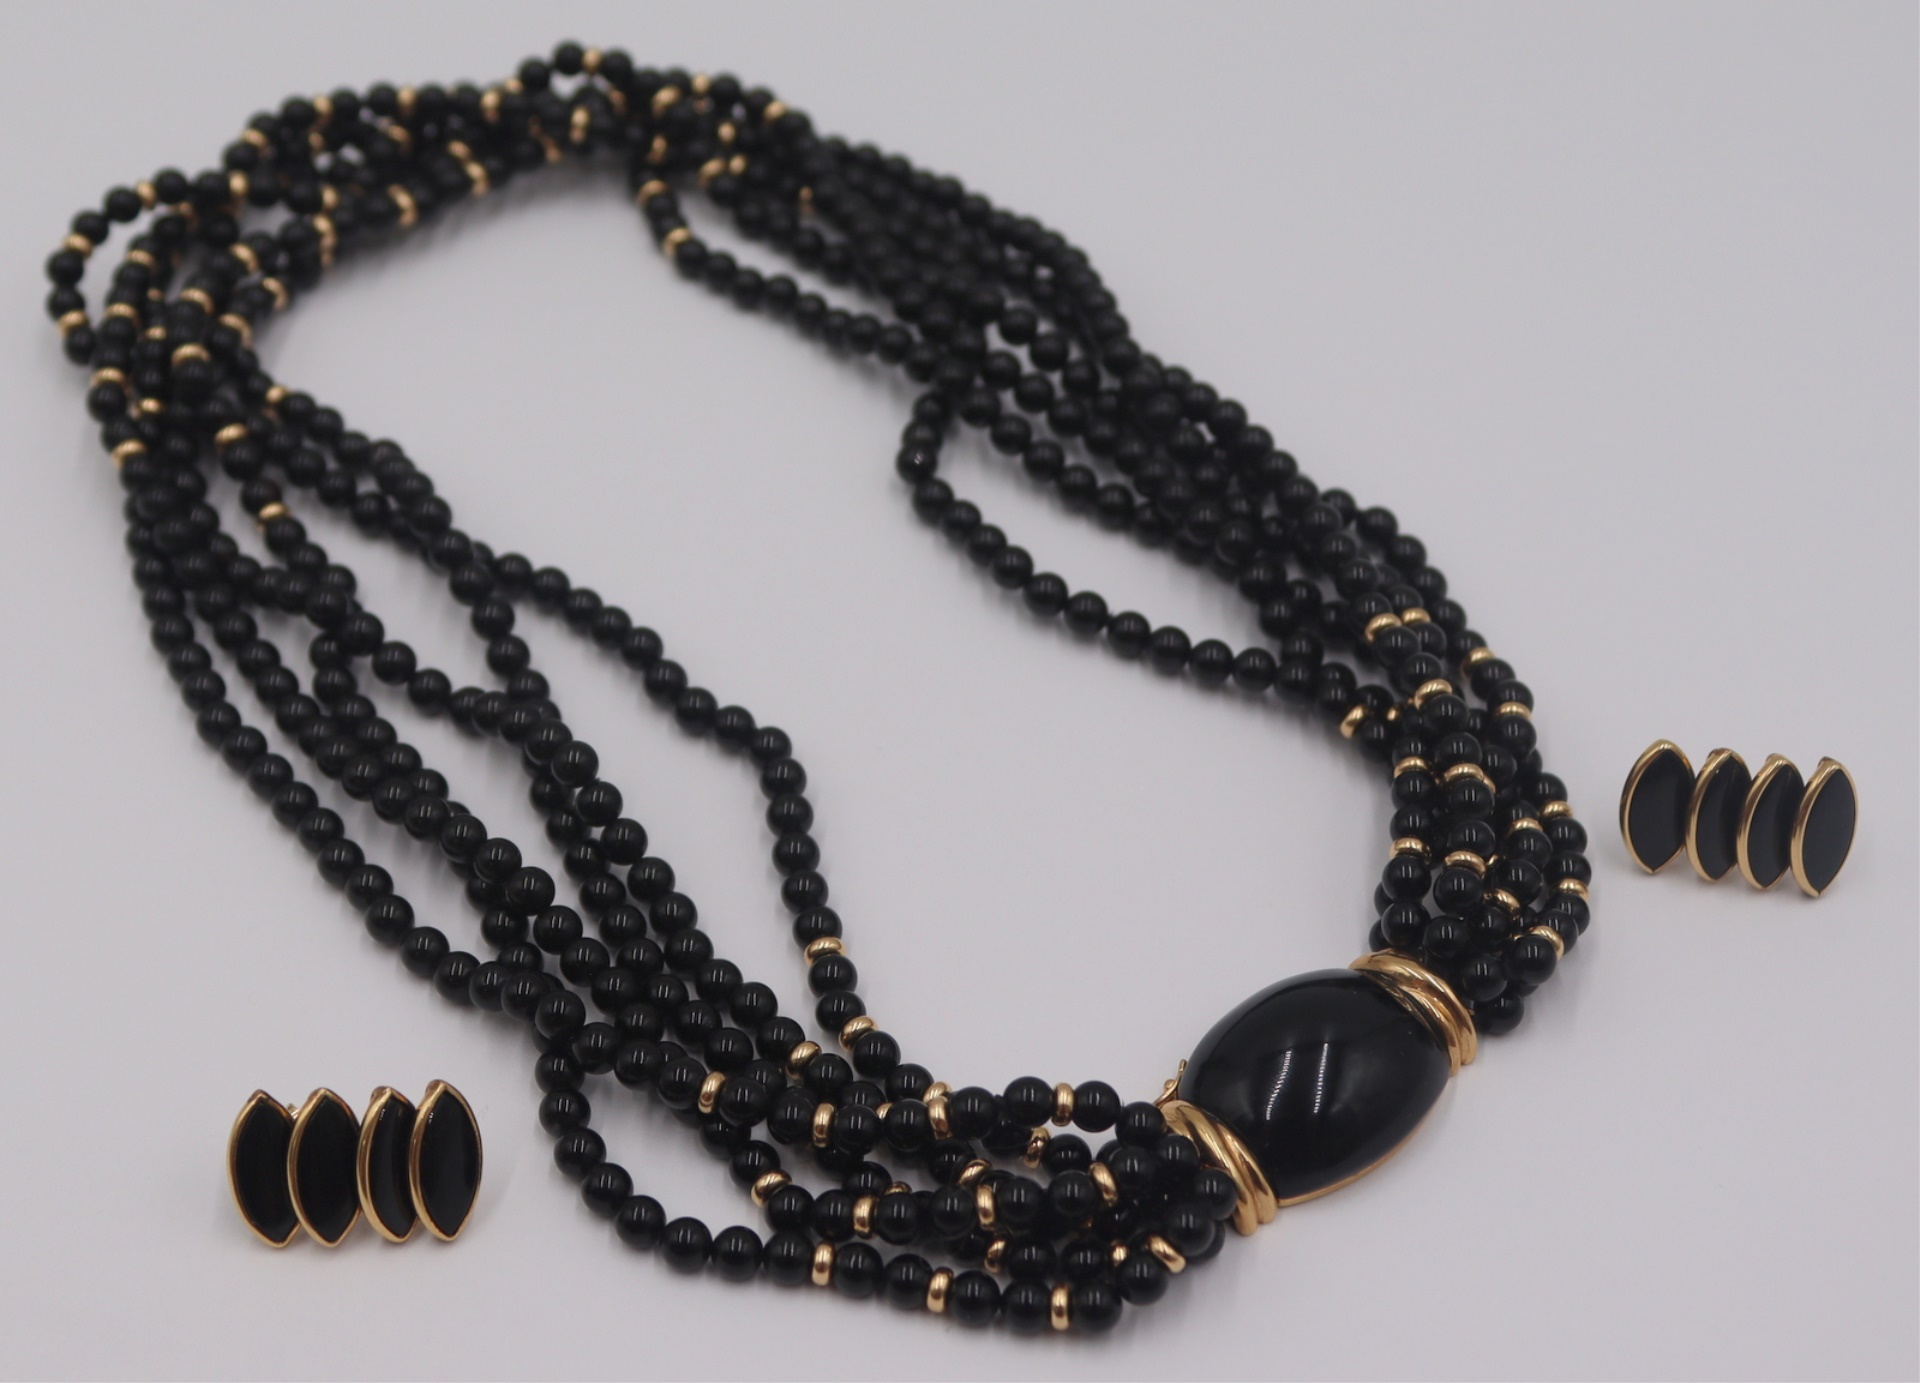 JEWELRY ONYX AND 14KT GOLD JEWELRY 3bb05e